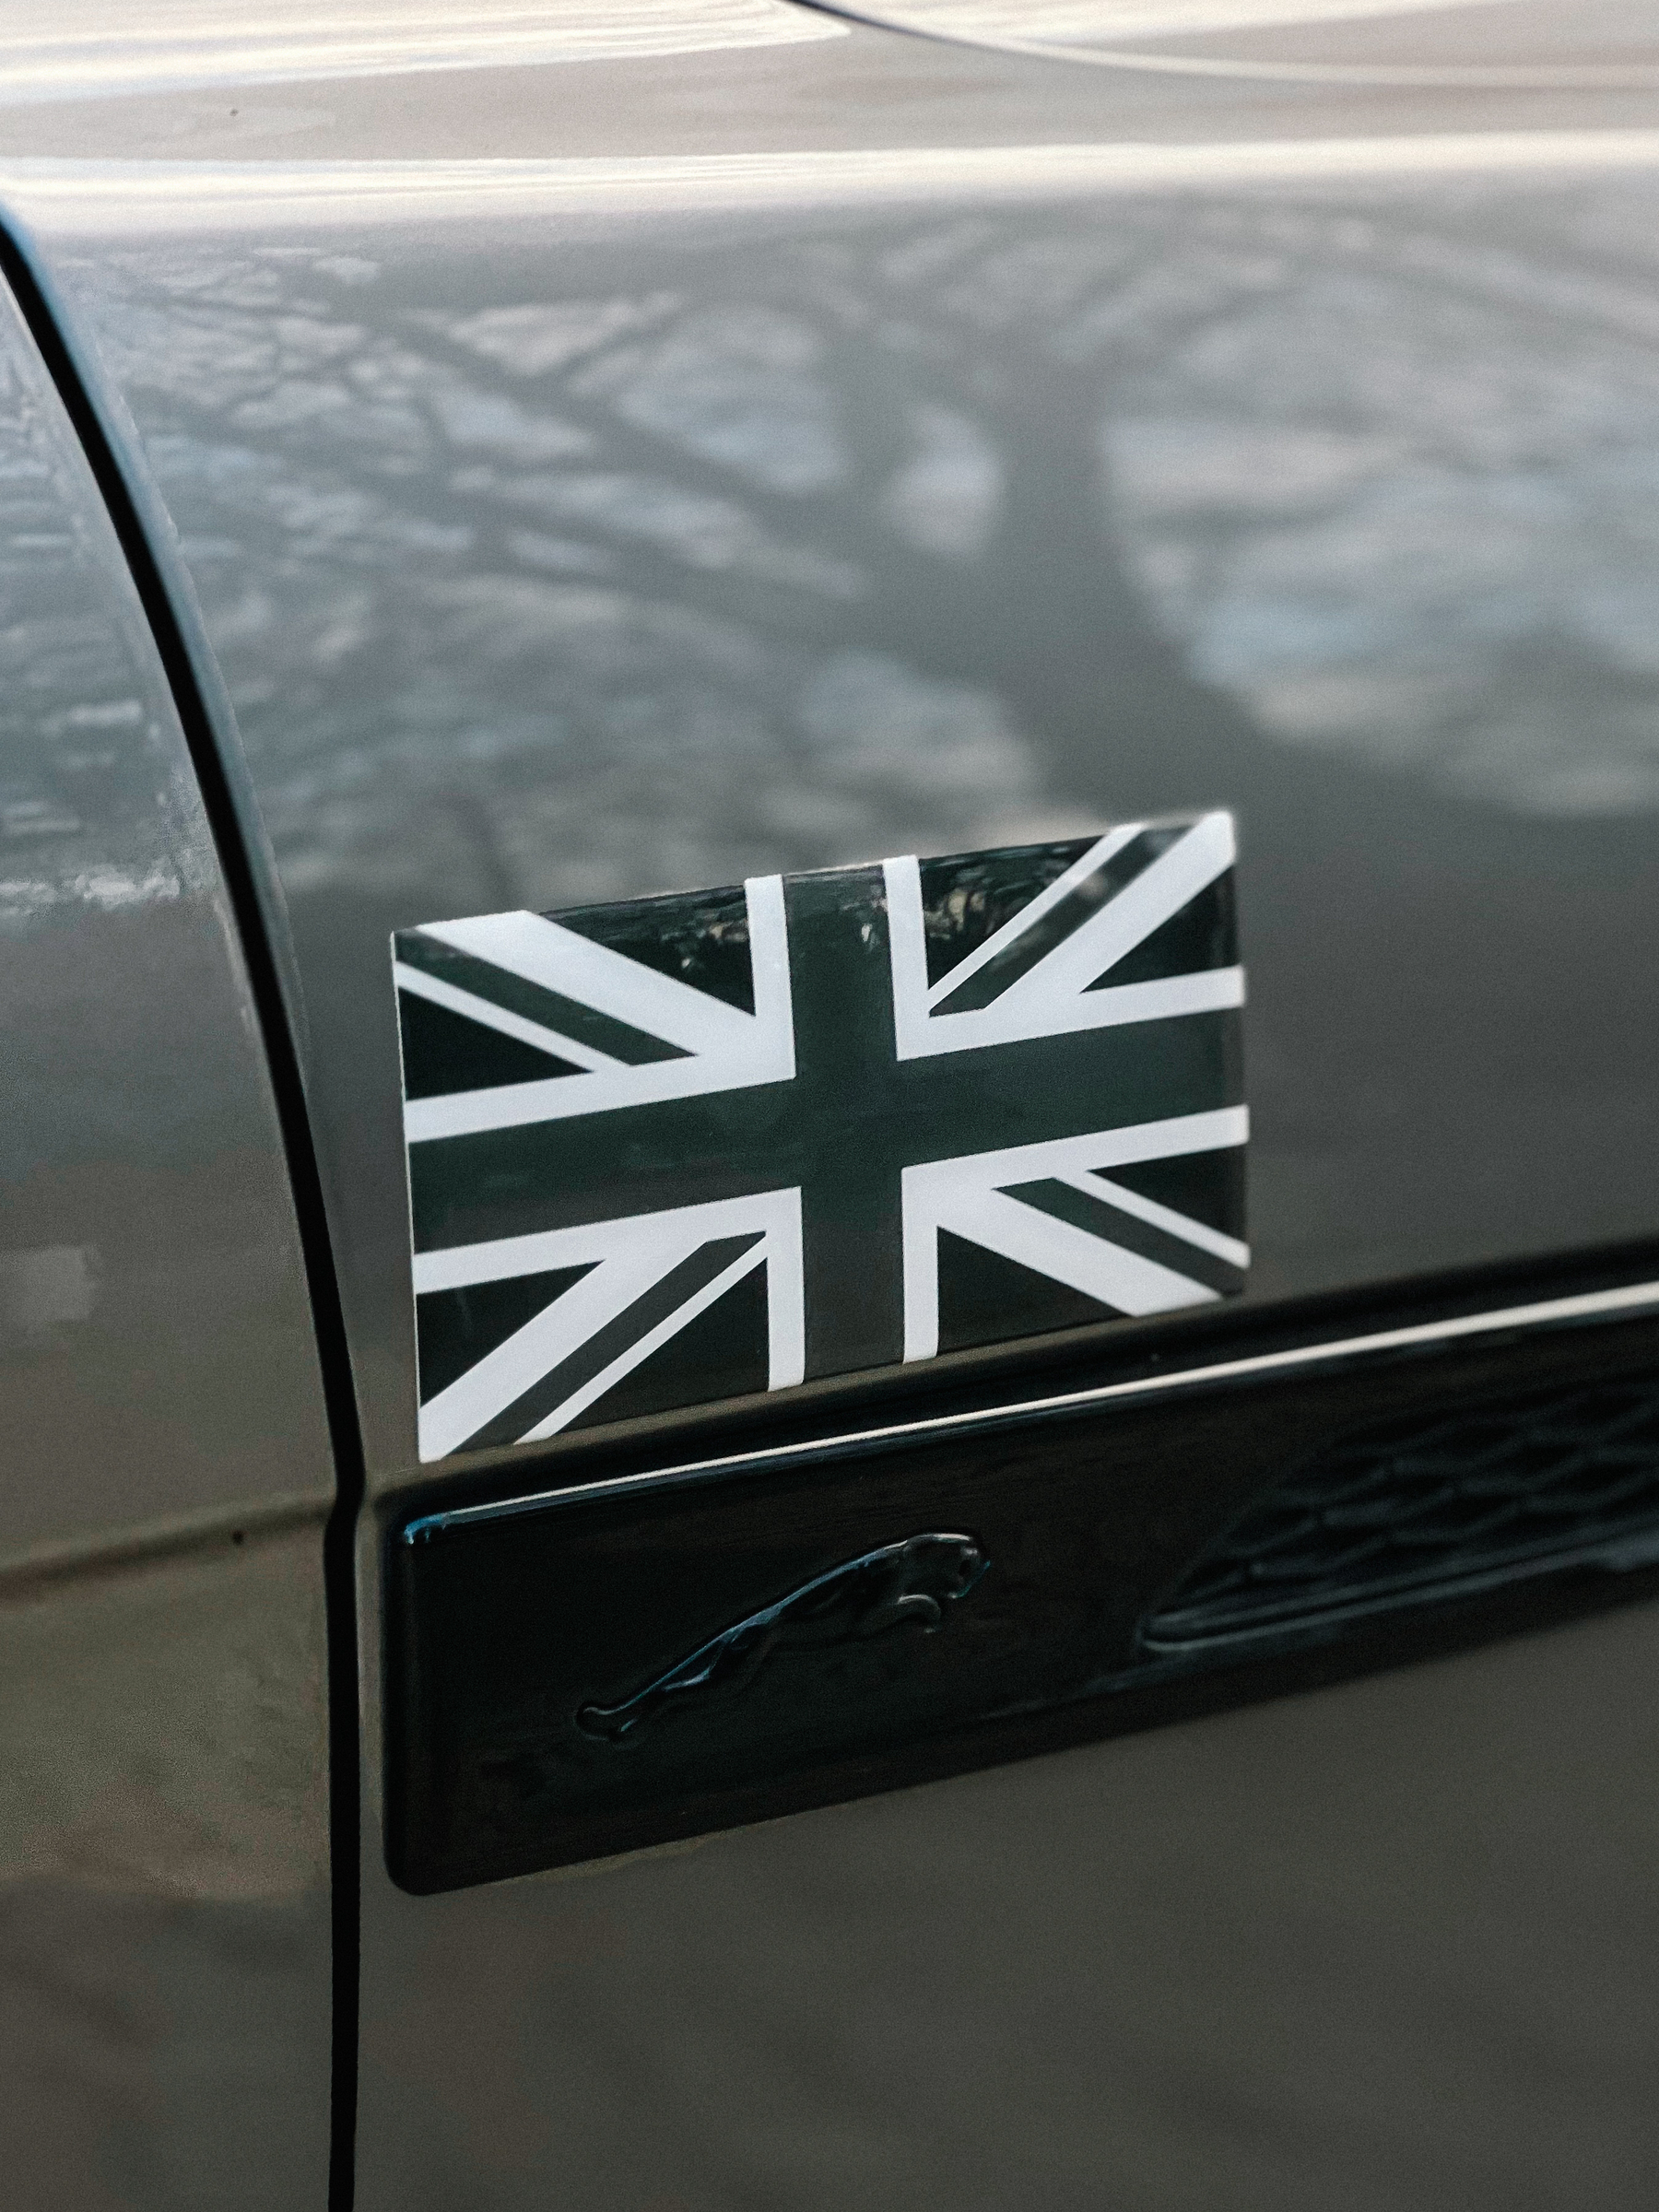 Black and white Union Jack flag sticker on a car&rsquo;s body, close up shot with focus on the flag, car&rsquo;s color and sticker details visible. Jaguar beneath the sticker.